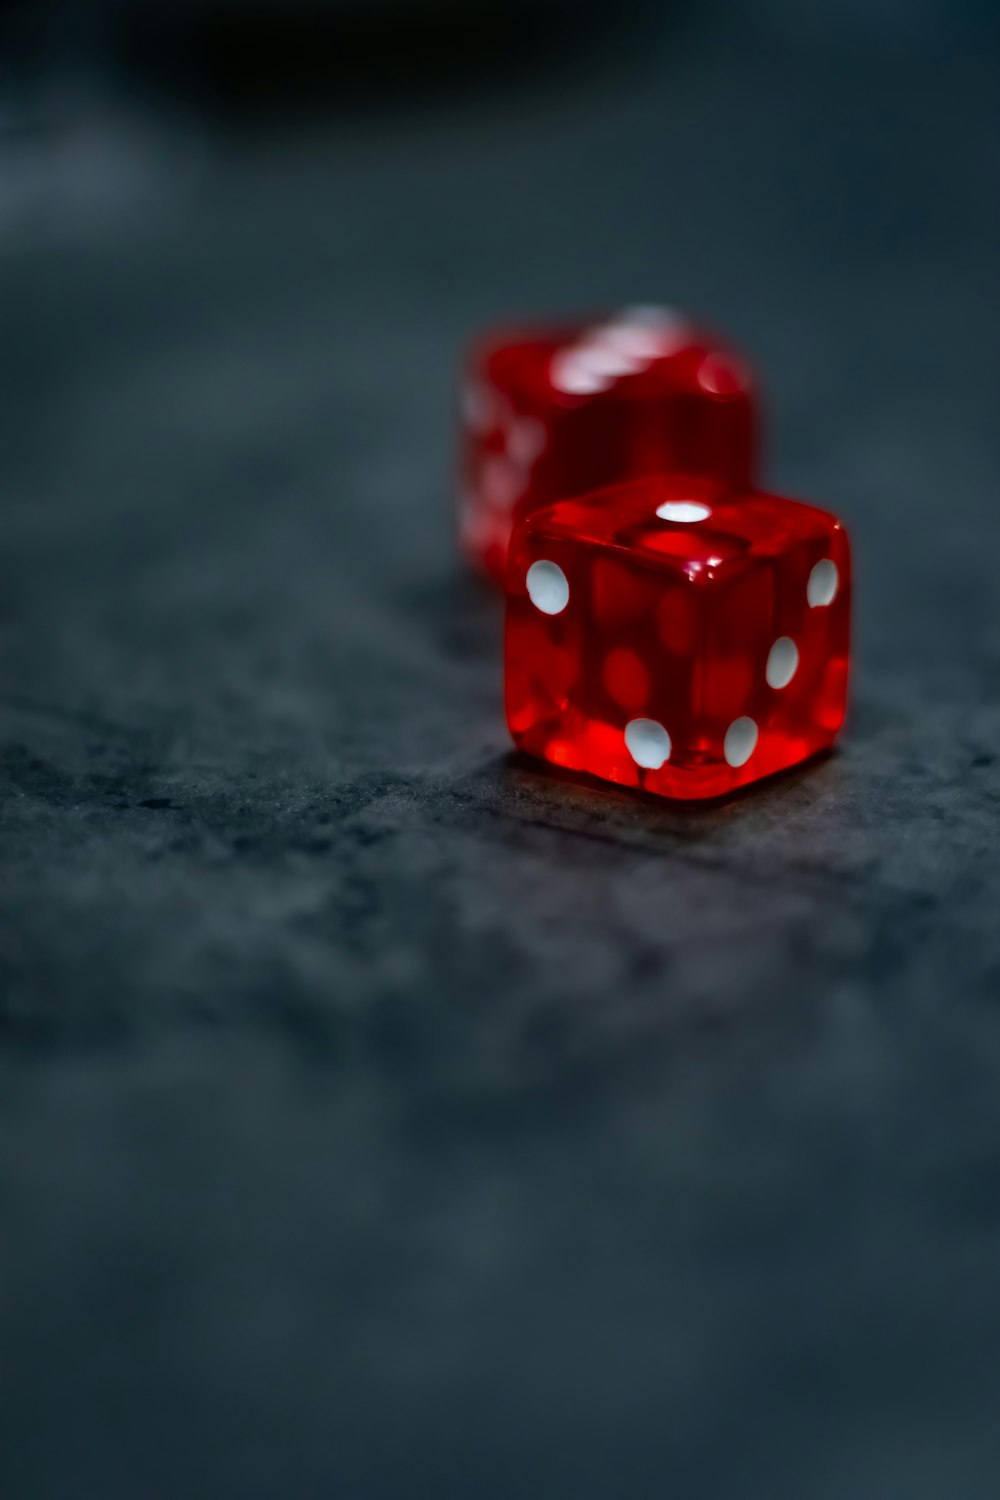 red and white dice on black surface